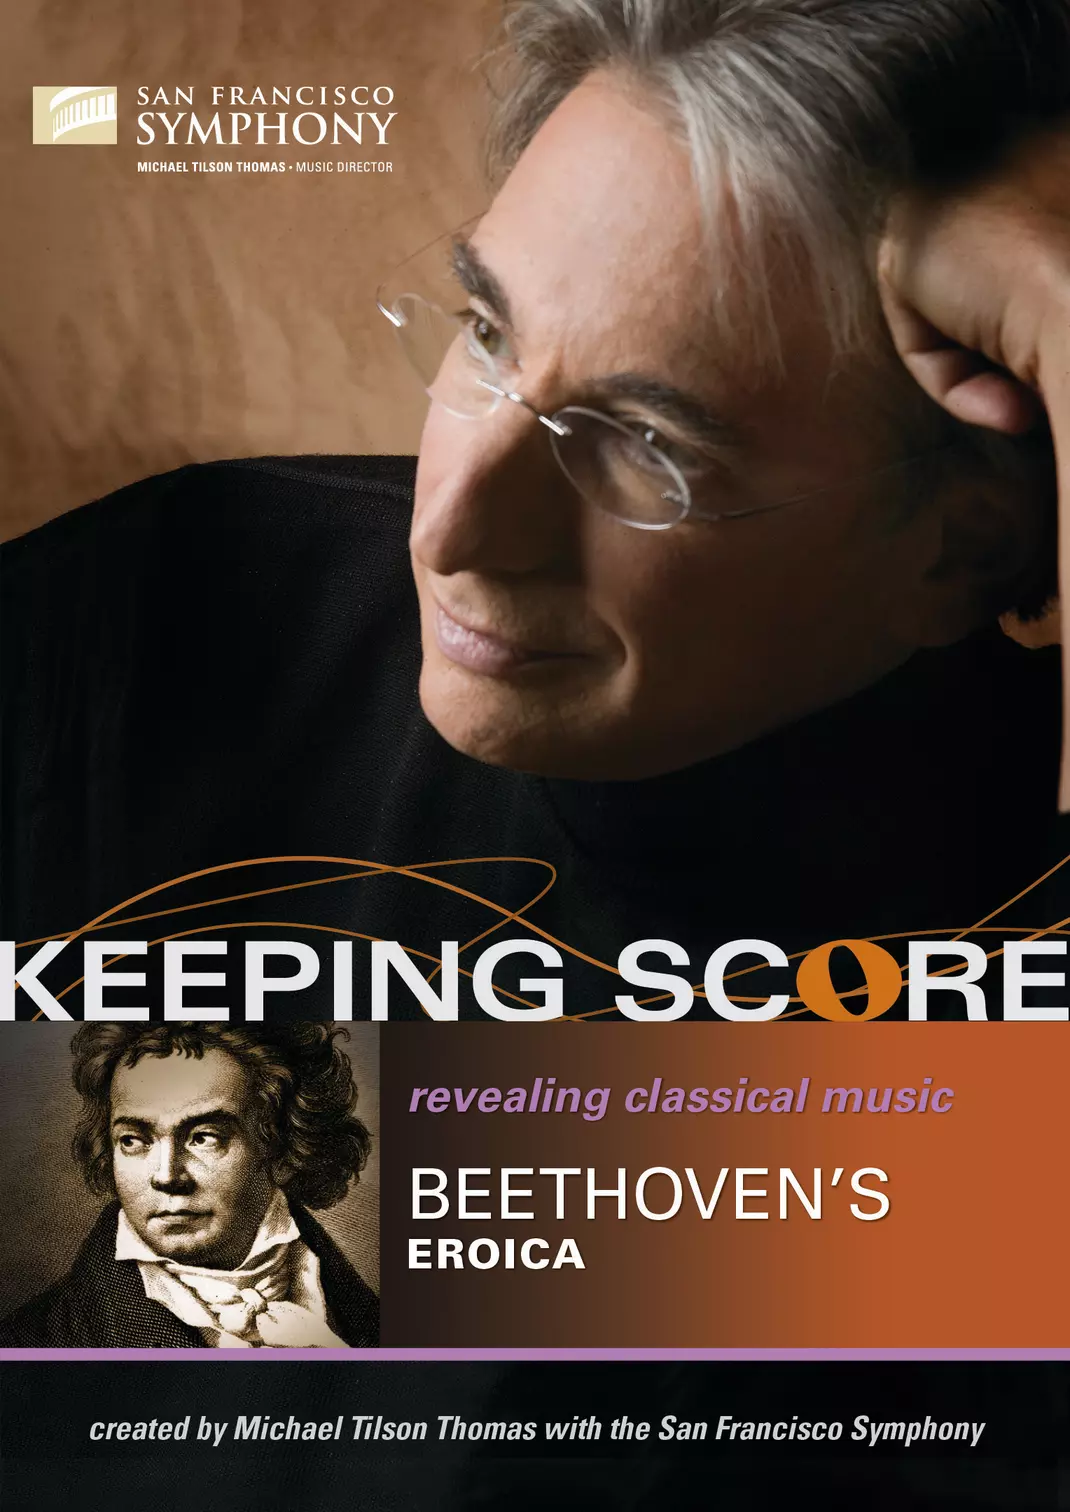 Keeping Score - Beethoven's Eroica